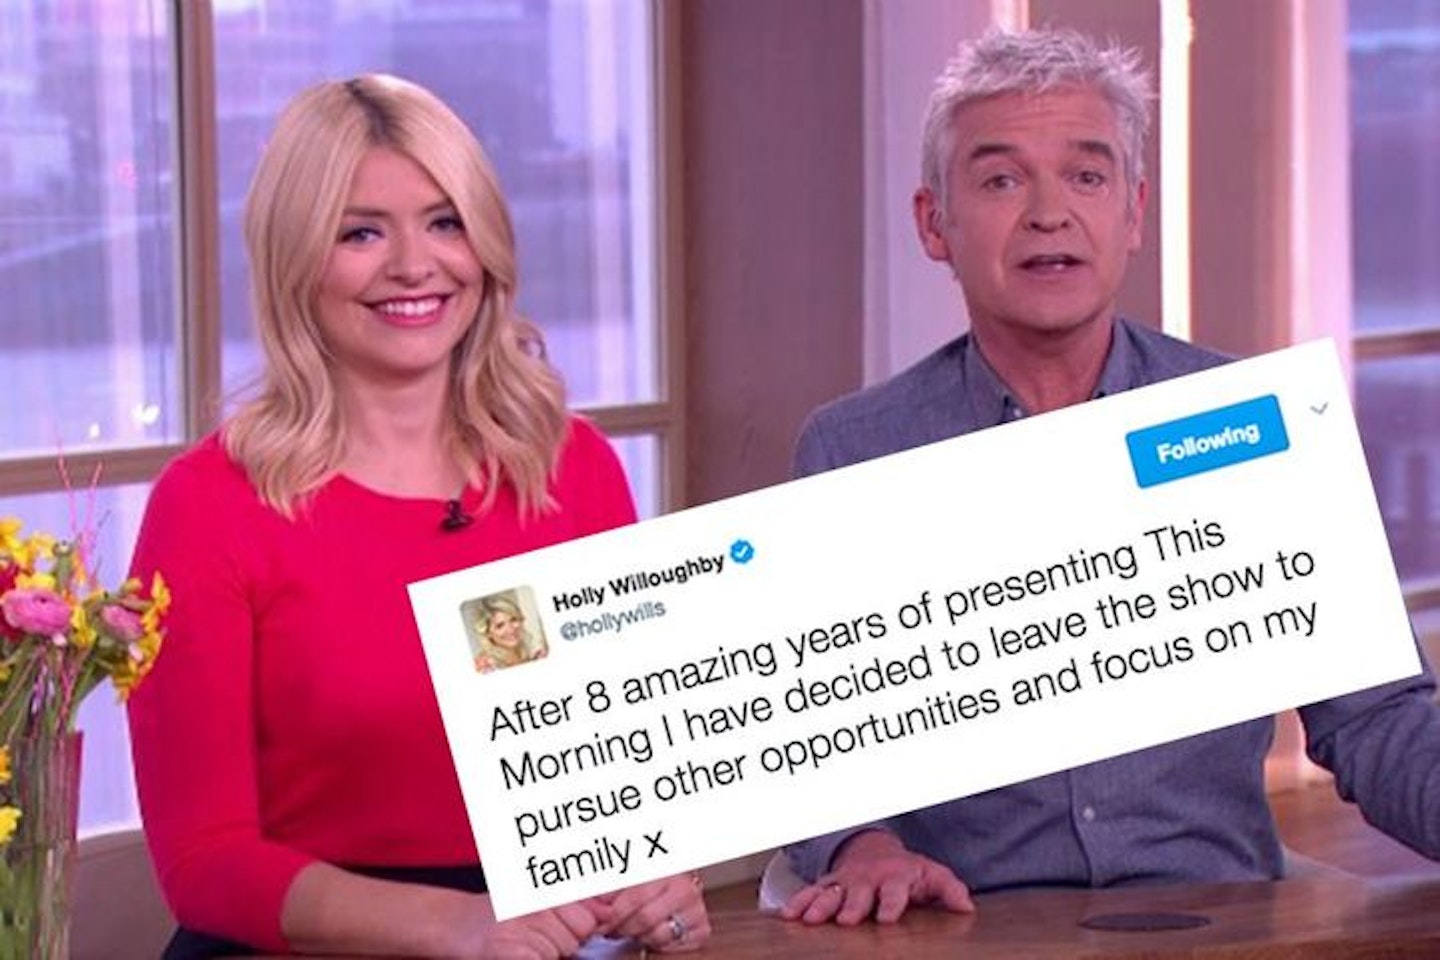 Holly Willoughby quit this morning tweet